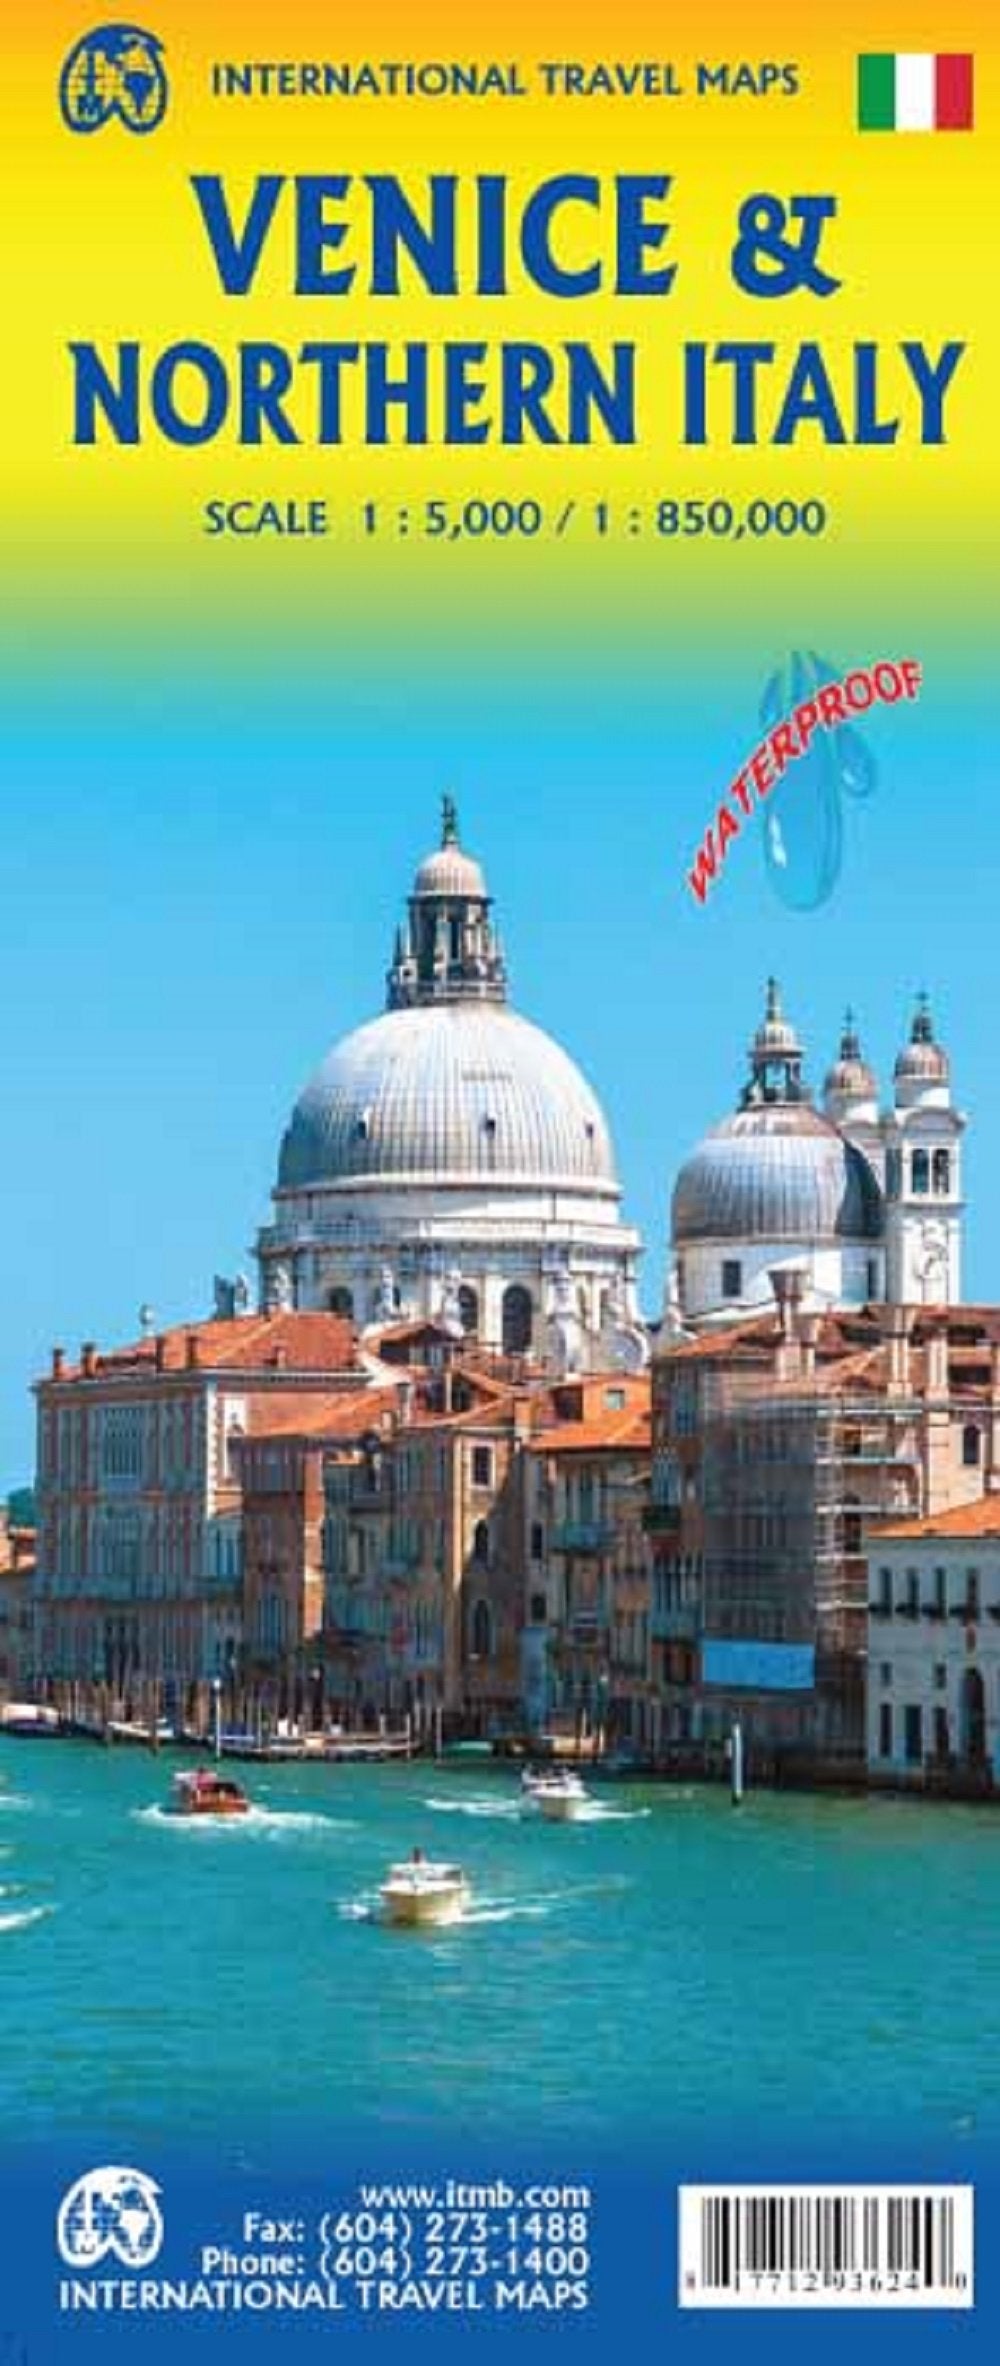 Venice & Northern Italy ITM Map 2e